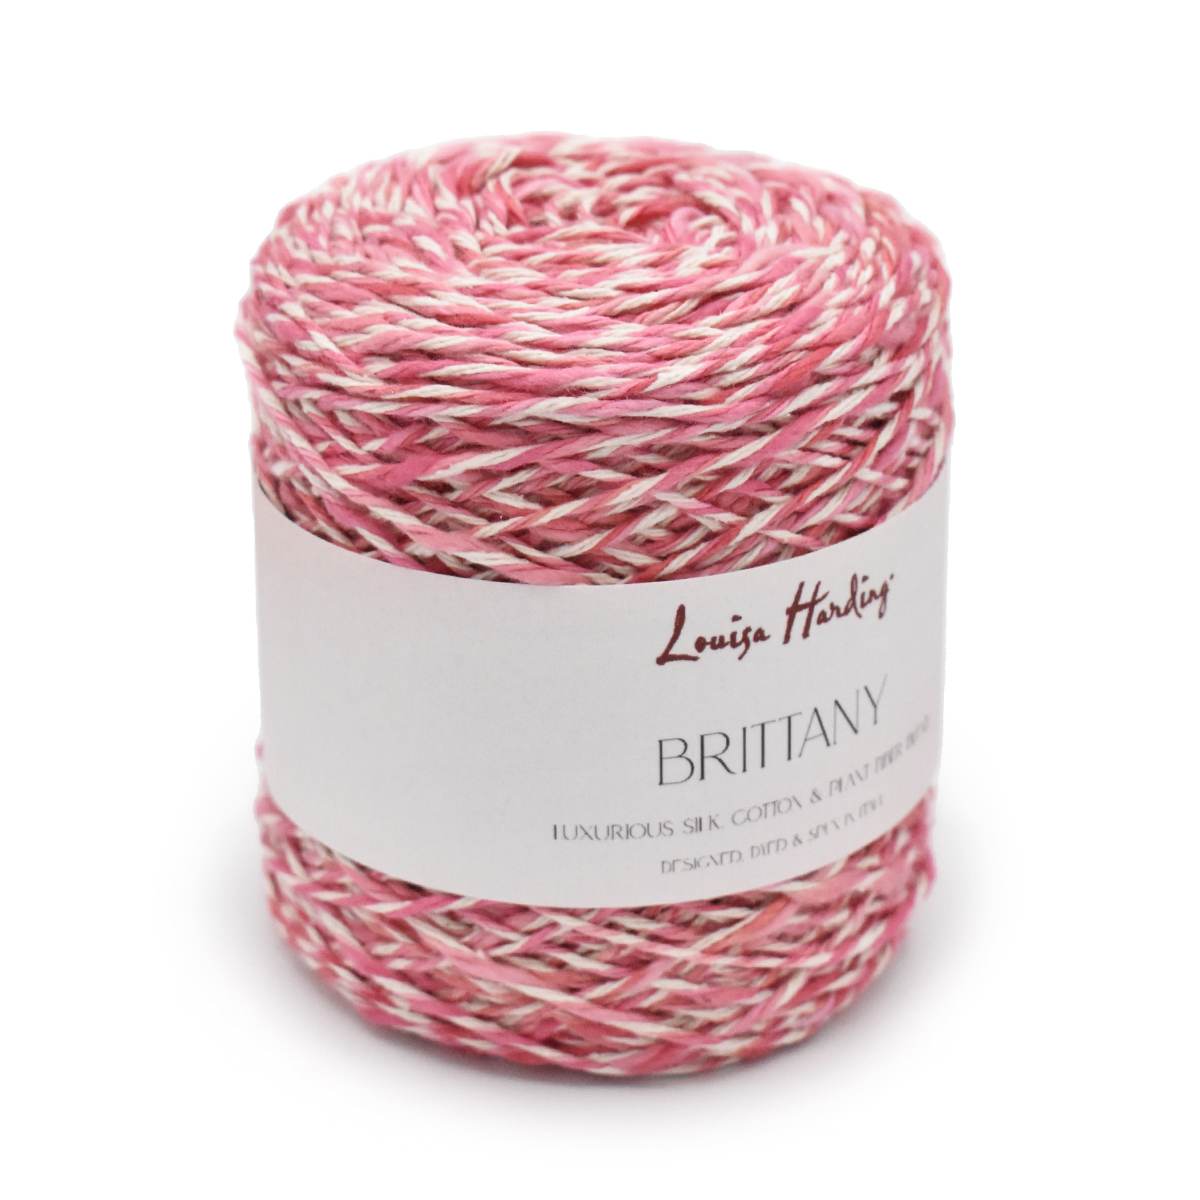 a skein of Brittany